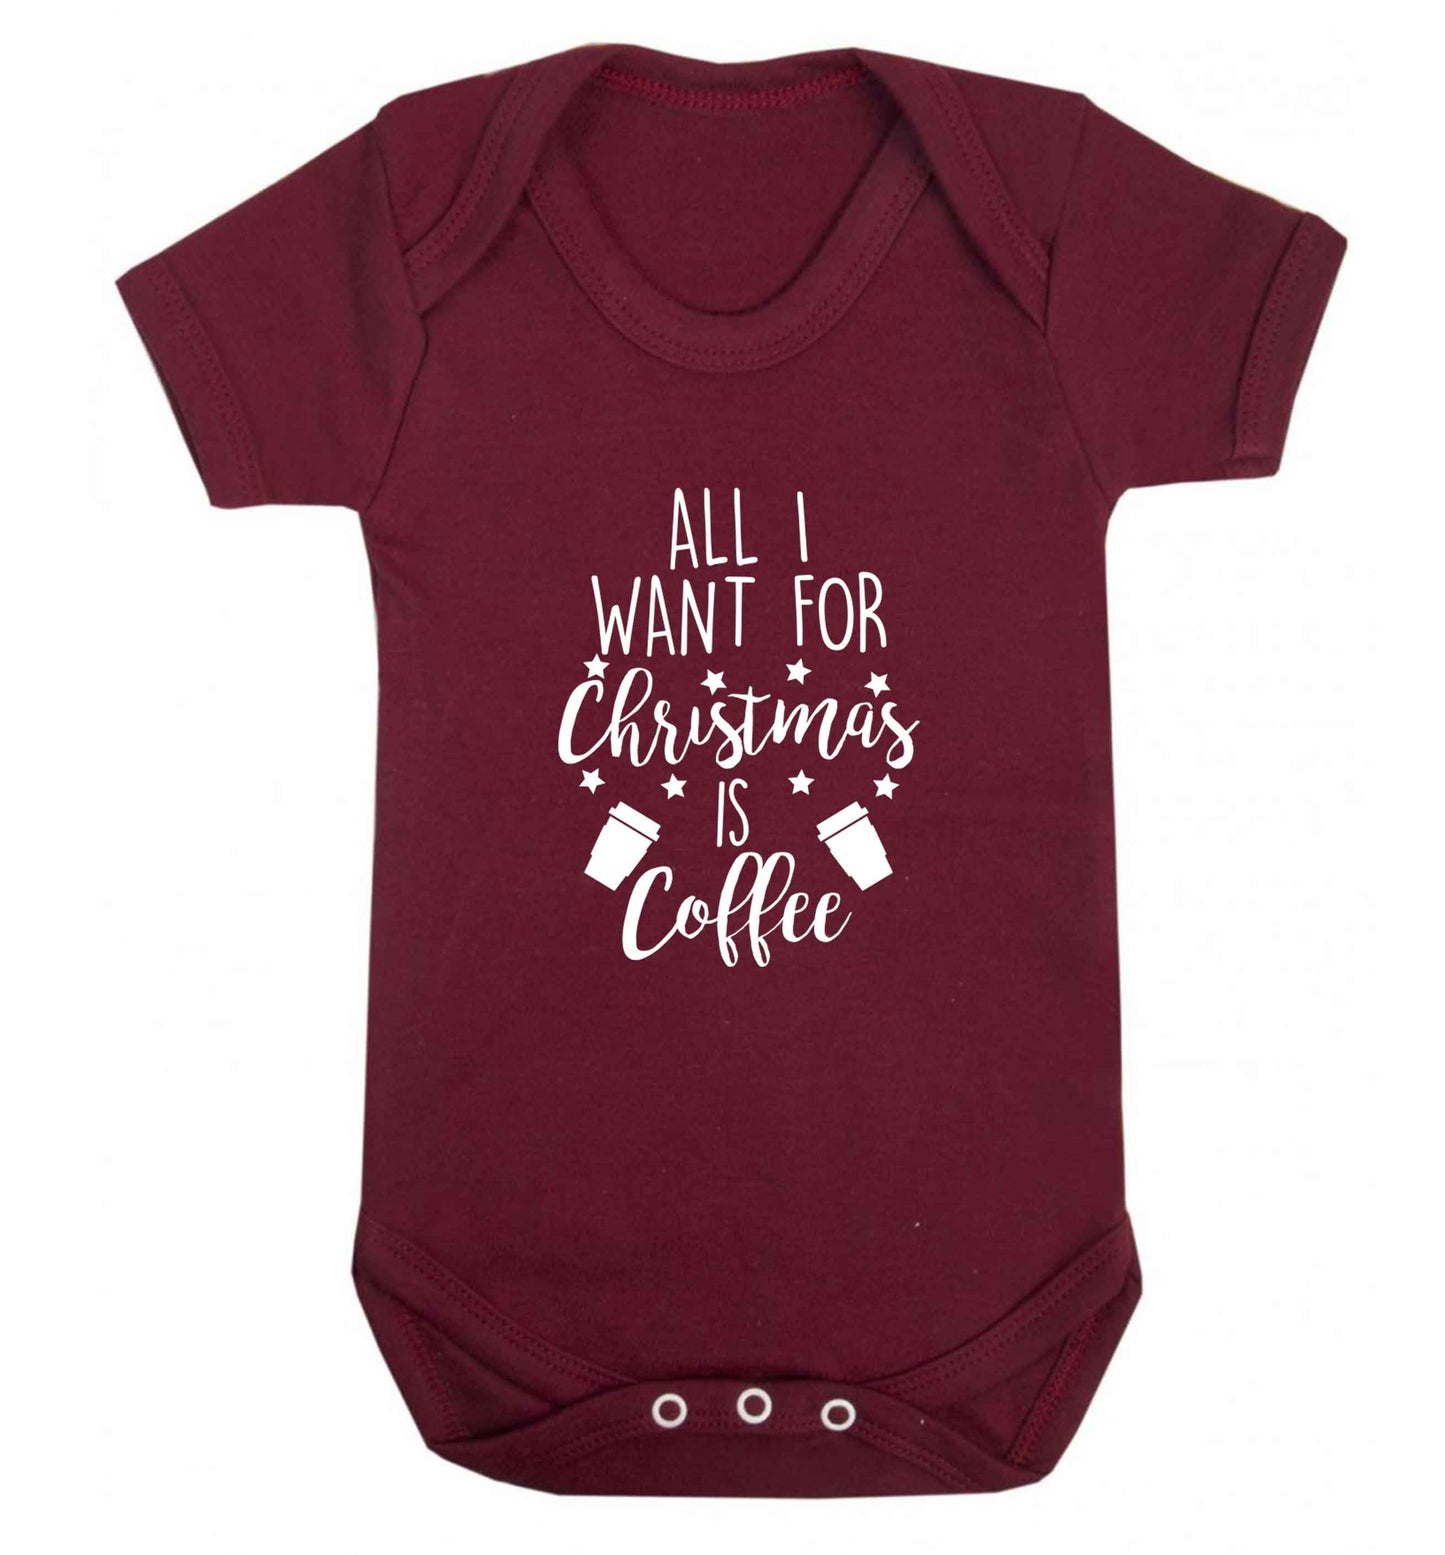 All I want for Christmas is coffee Baby Vest maroon 18-24 months